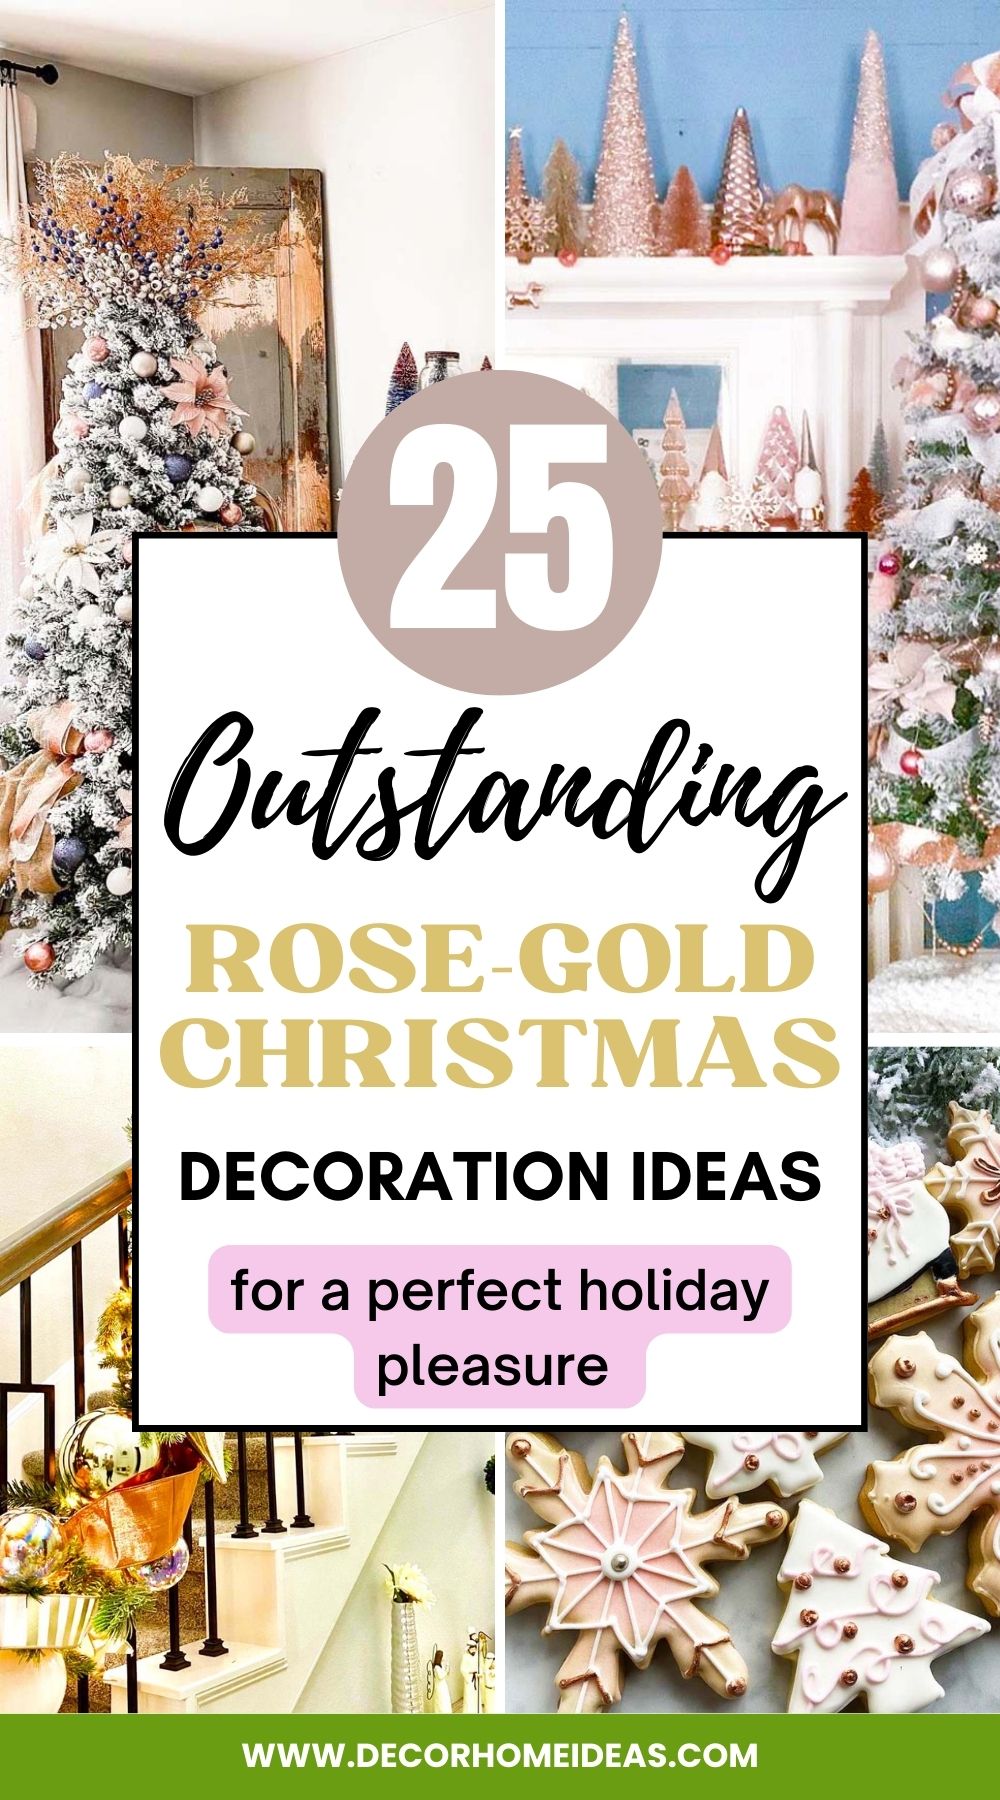 Elevate your Christmas festivities with 25 enchanting rose gold decoration ideas. Discover the perfect inspiration to make this holiday season shine in the warm, elegant hues of rose gold.